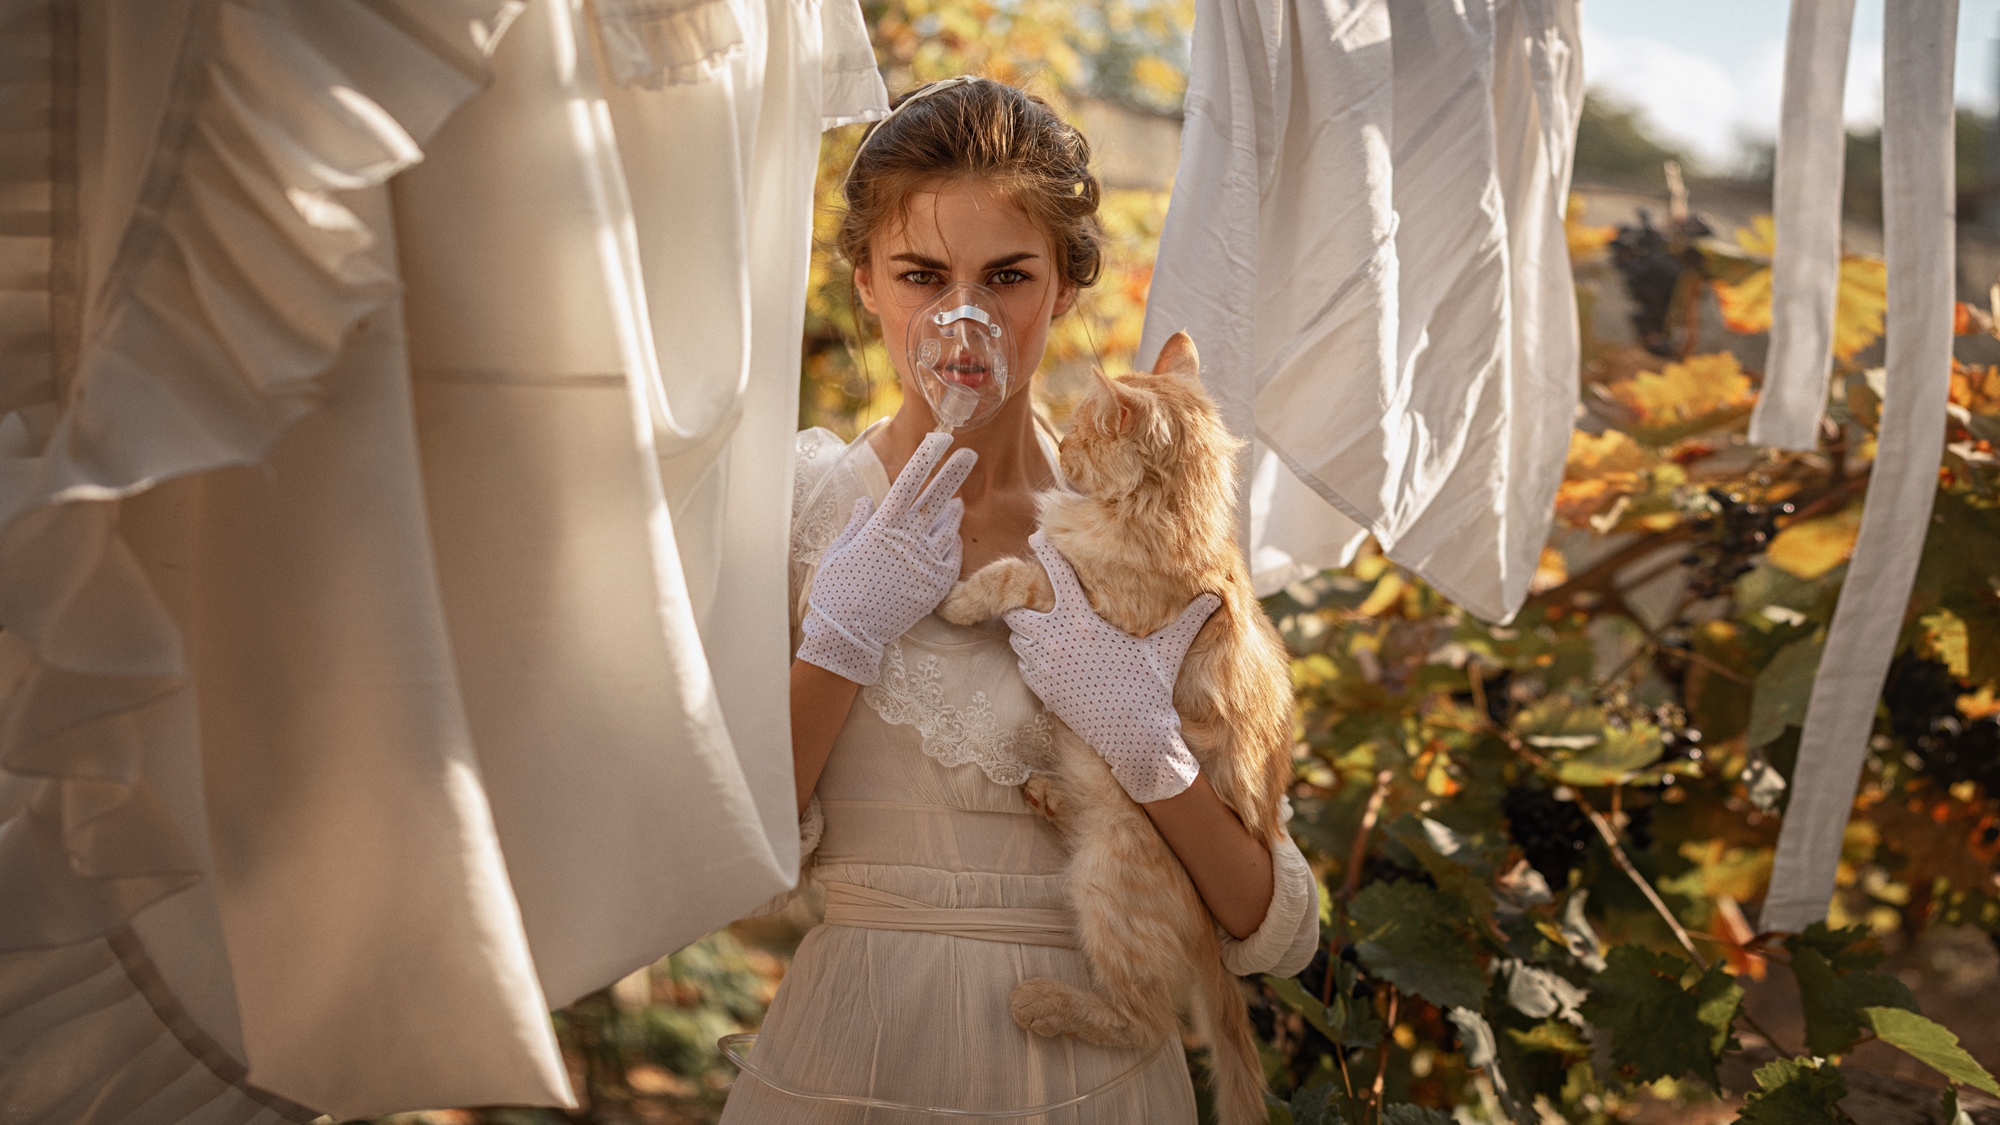 Mask Women Model Cats Laundry Dress Gloves Women Outdoors Plants Outdoors Animals Mammals Looking At 2000x1125